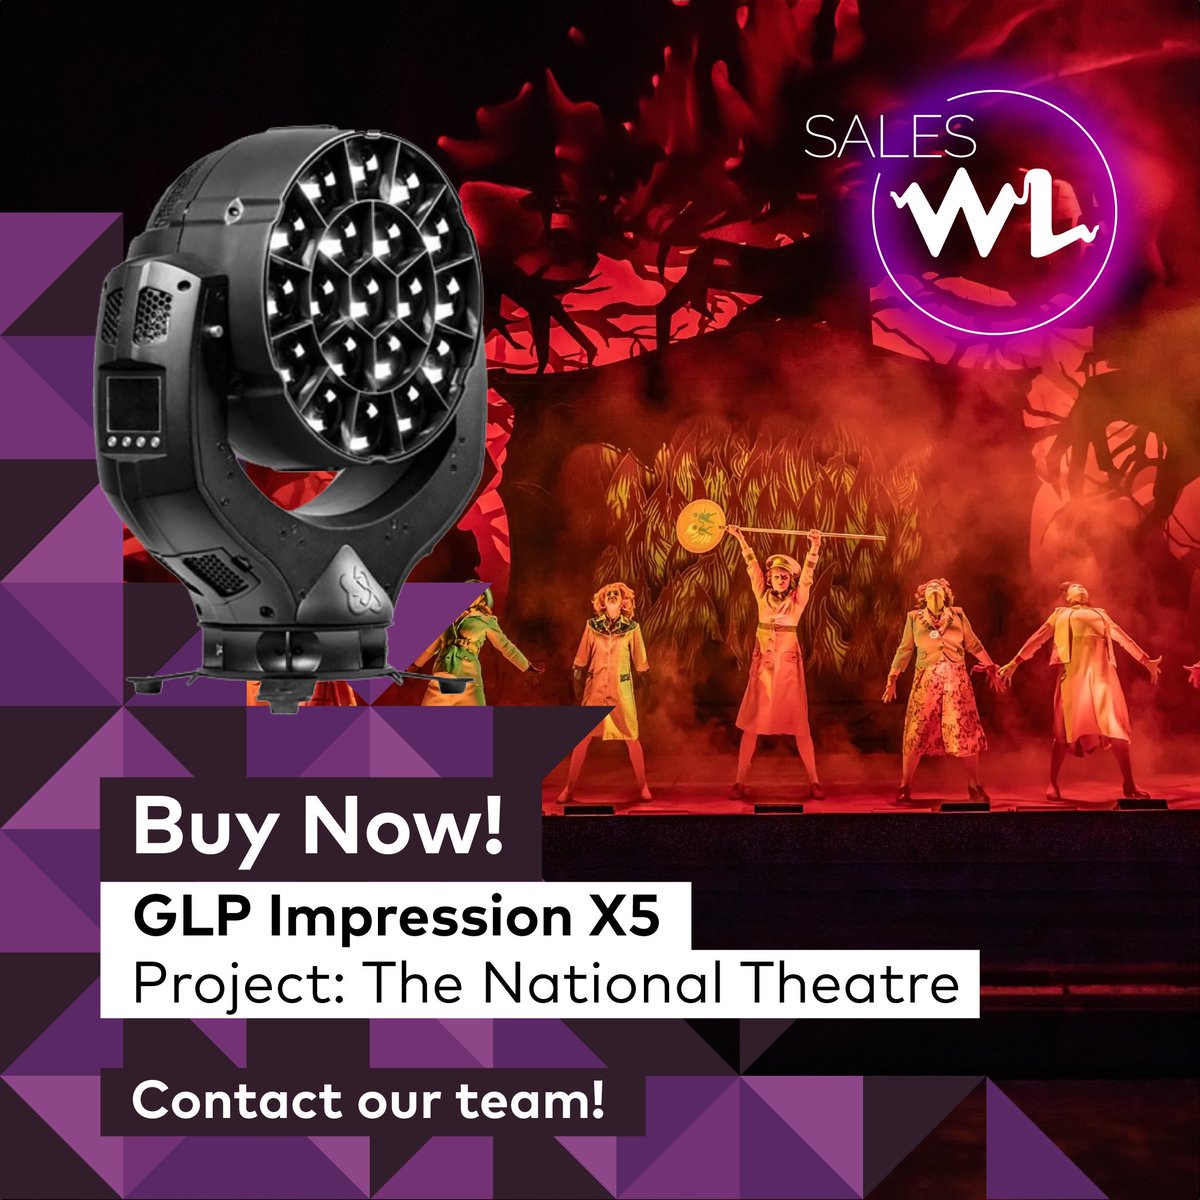 Available to Purchase - @GLPimpression Impression X5 The GLP impression X5 is the next generation of high performance, professional LED washlights, incorporating cutting-edge technology with extensive user input. Now available to purchase via SalesWL: hubs.la/Q02qpkp30